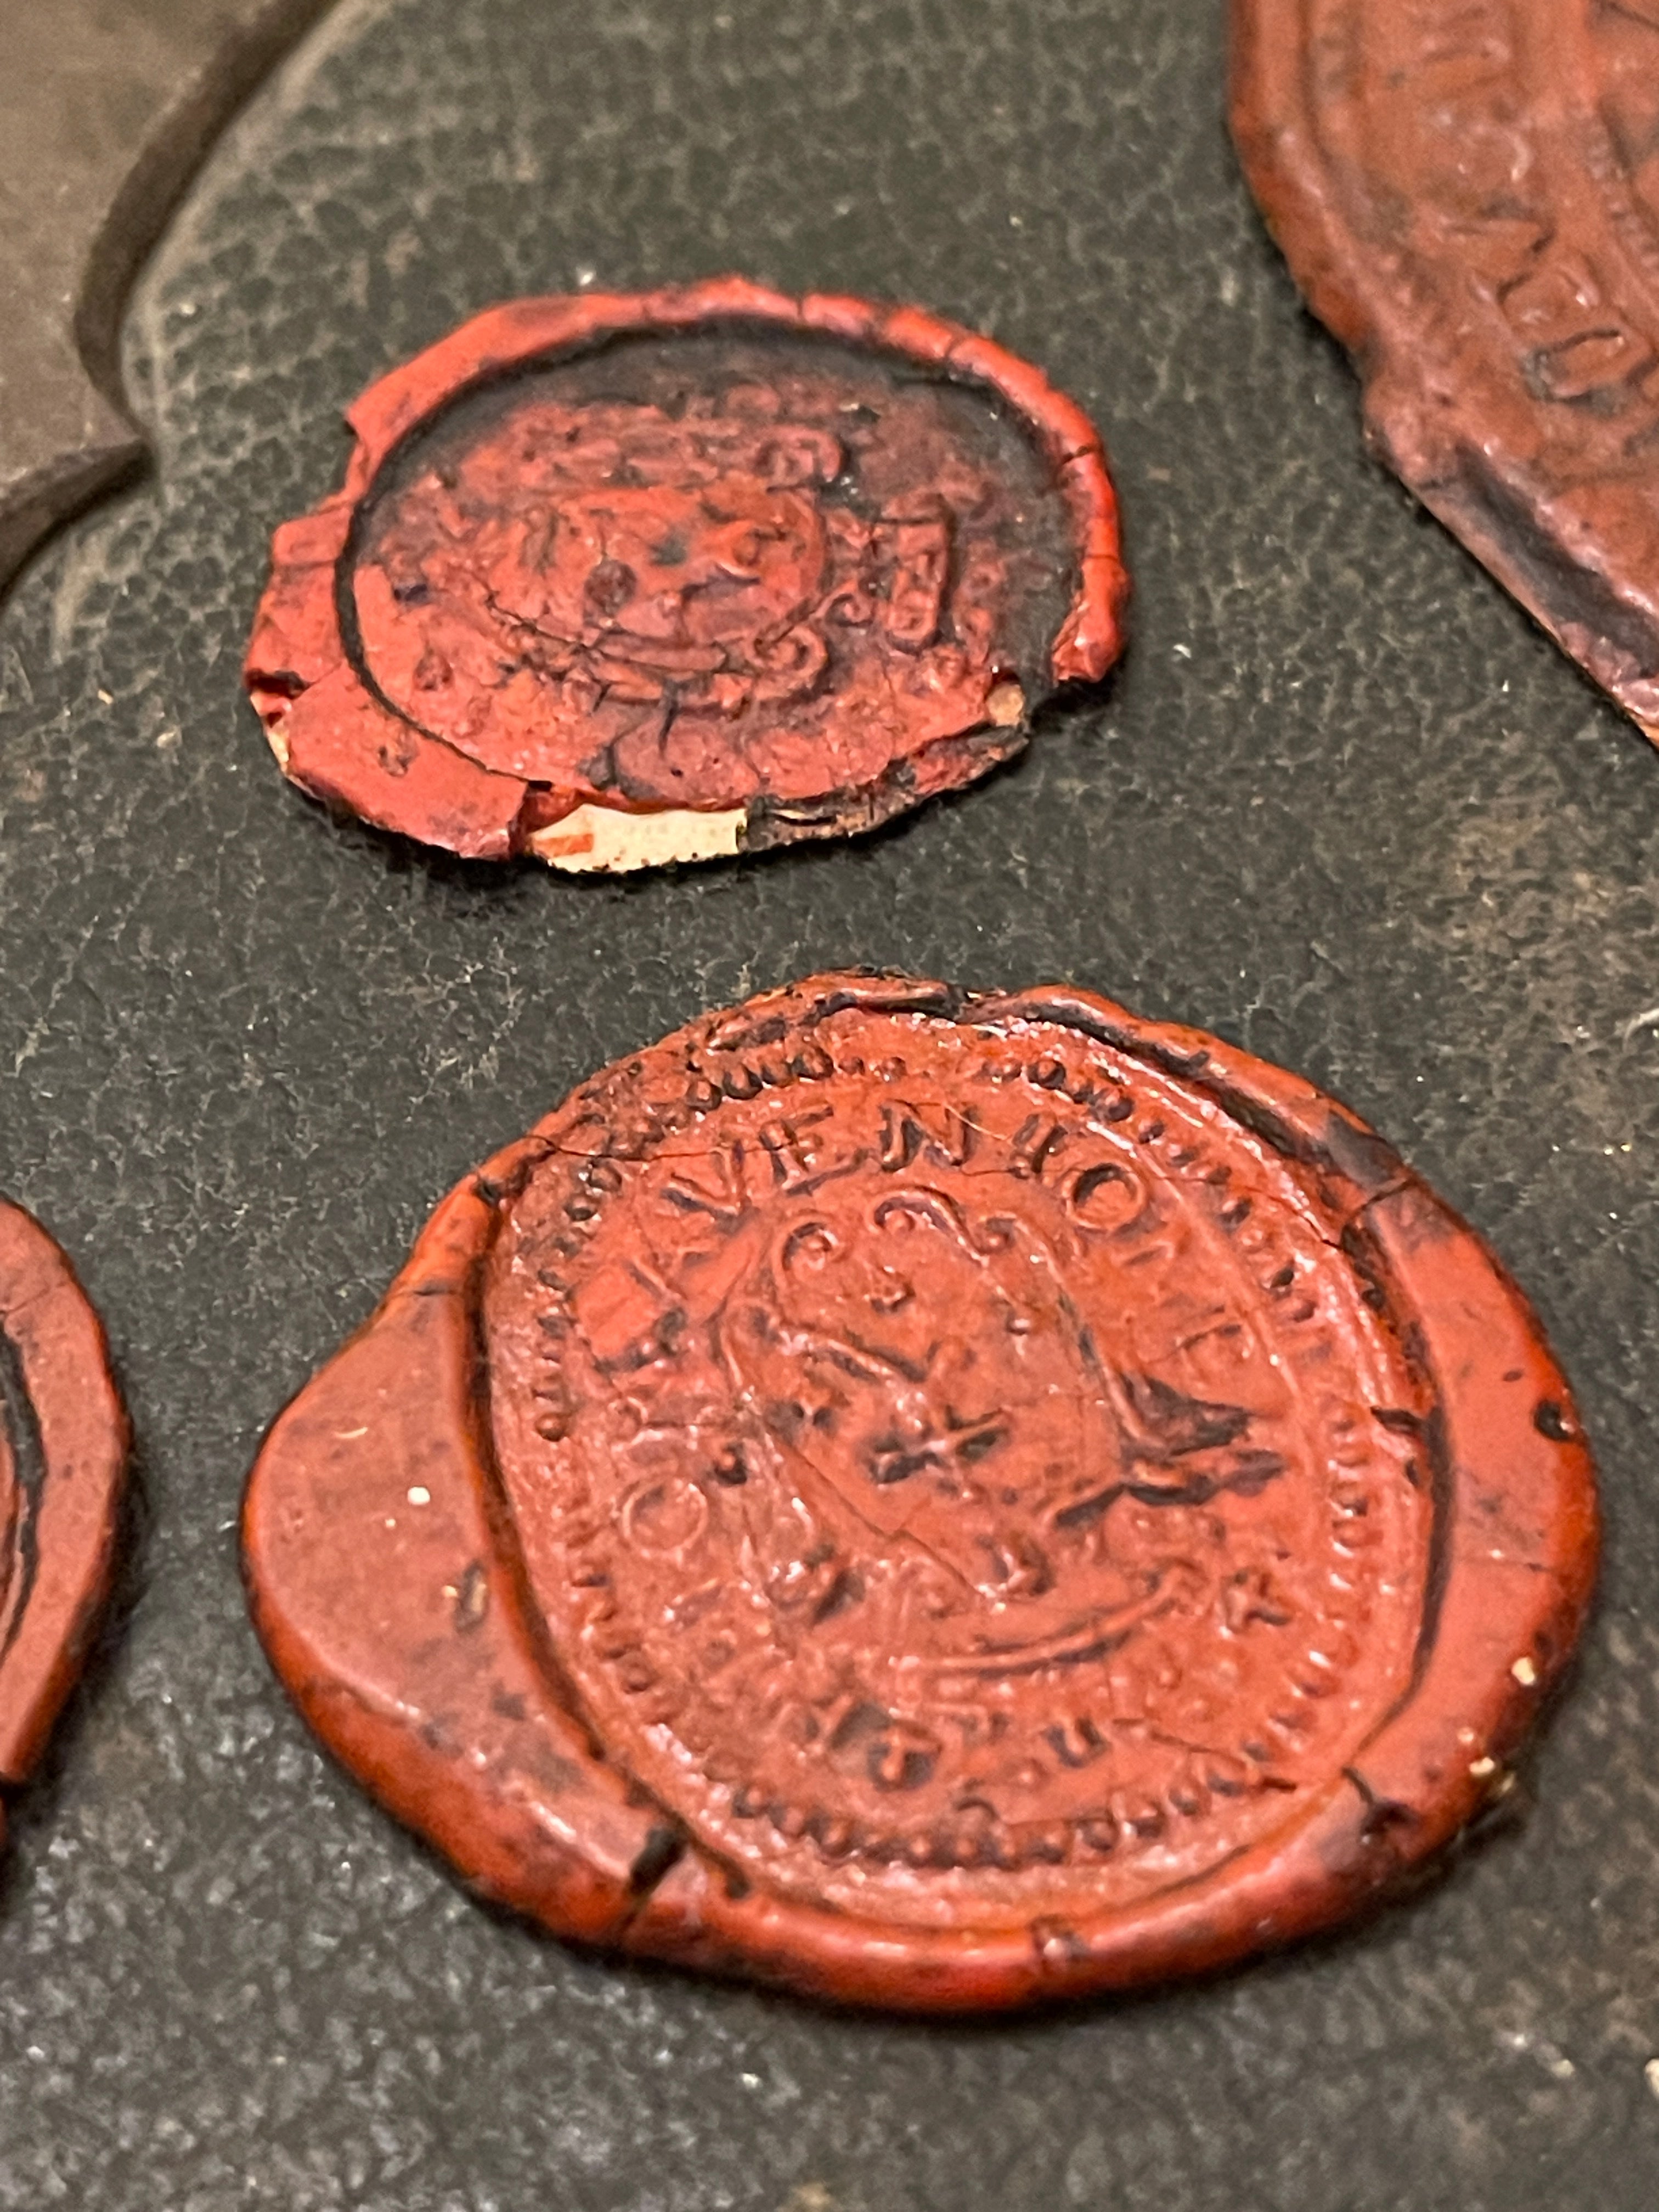 Large French 1700's Wax Seal Collection - Red